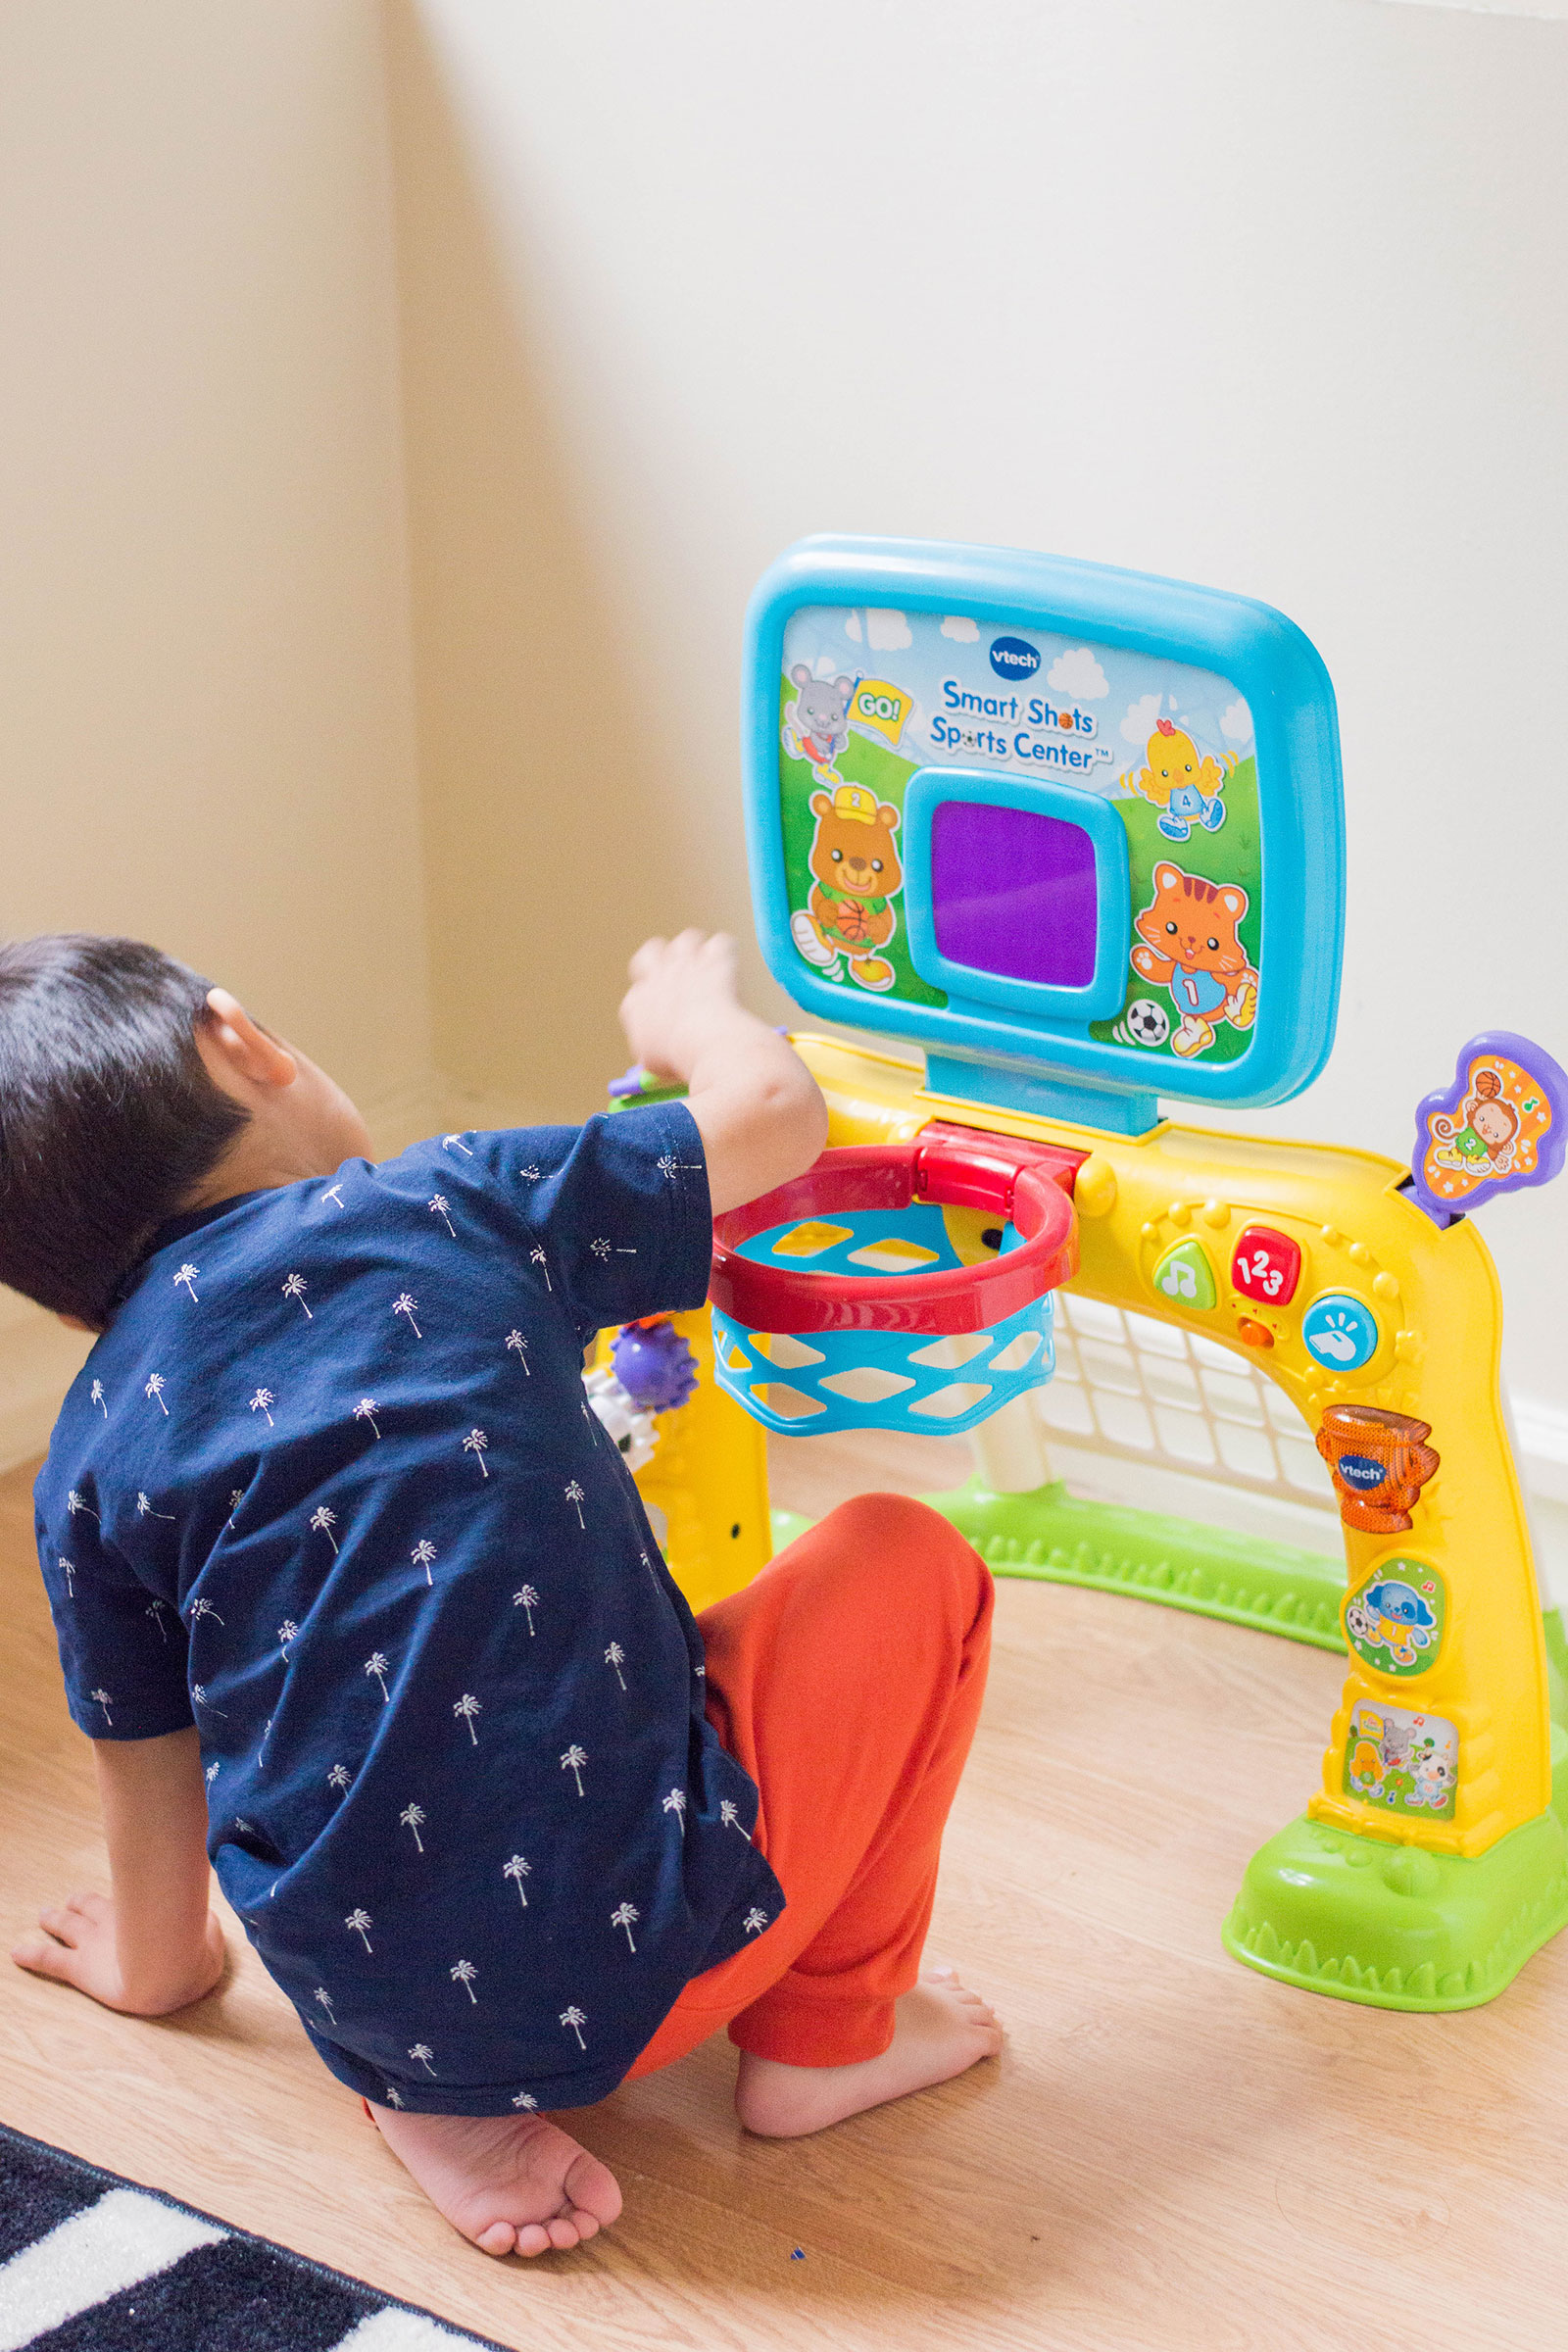 Here are (in our toy-loving opinion) some of the best toddler toys out there. Check out our list and get inspired for your little one - it's play time! #besttoddlertoys #toddlergiftideas